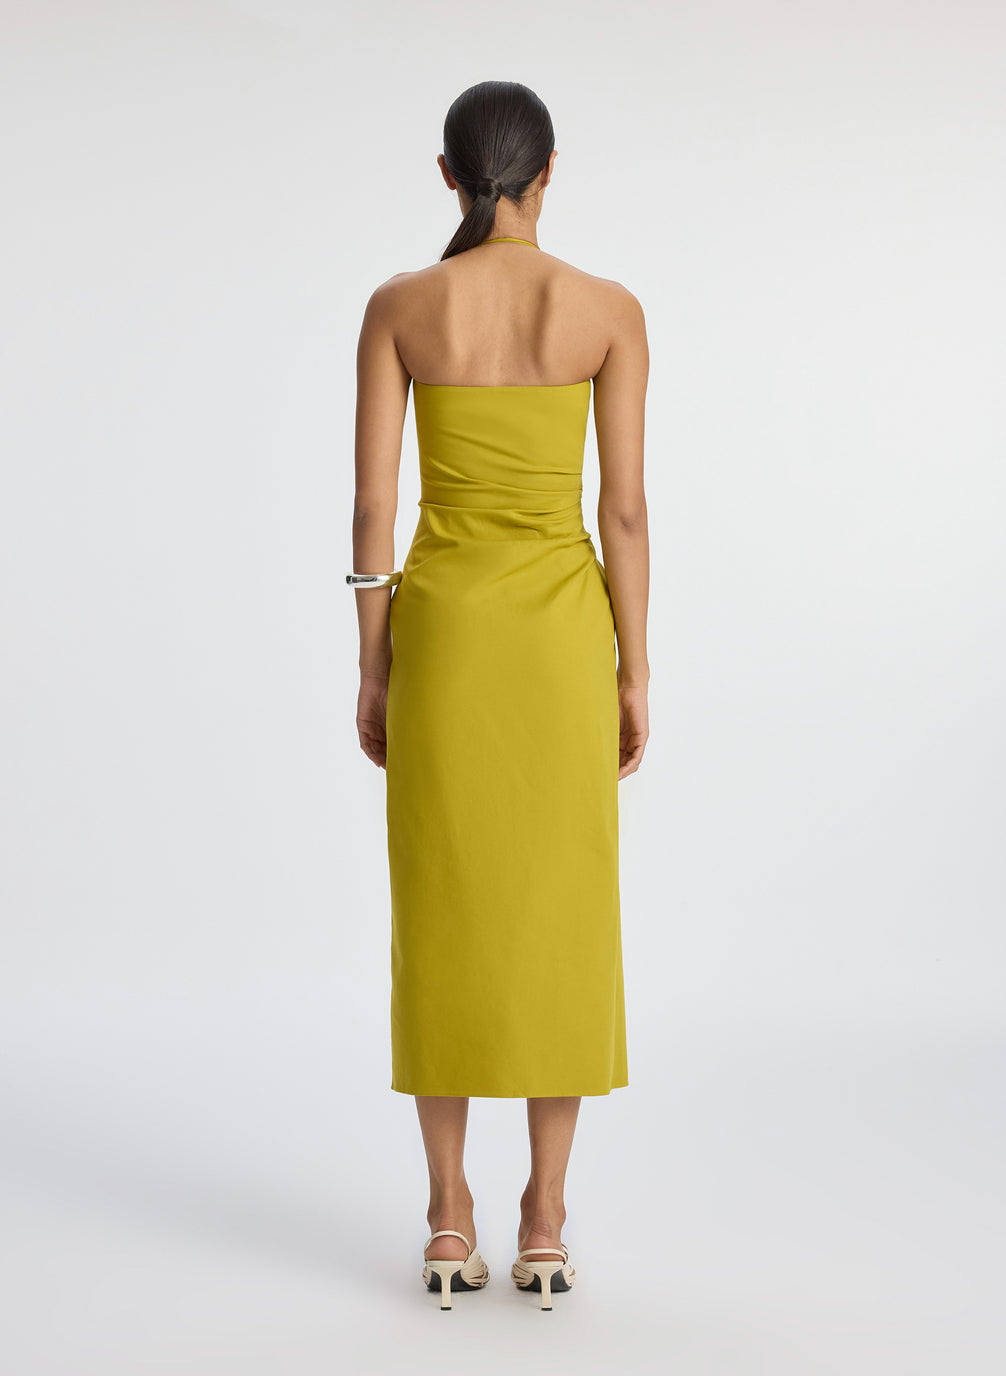 back  view of woman wearing yellow halter neckline ruched midi dress